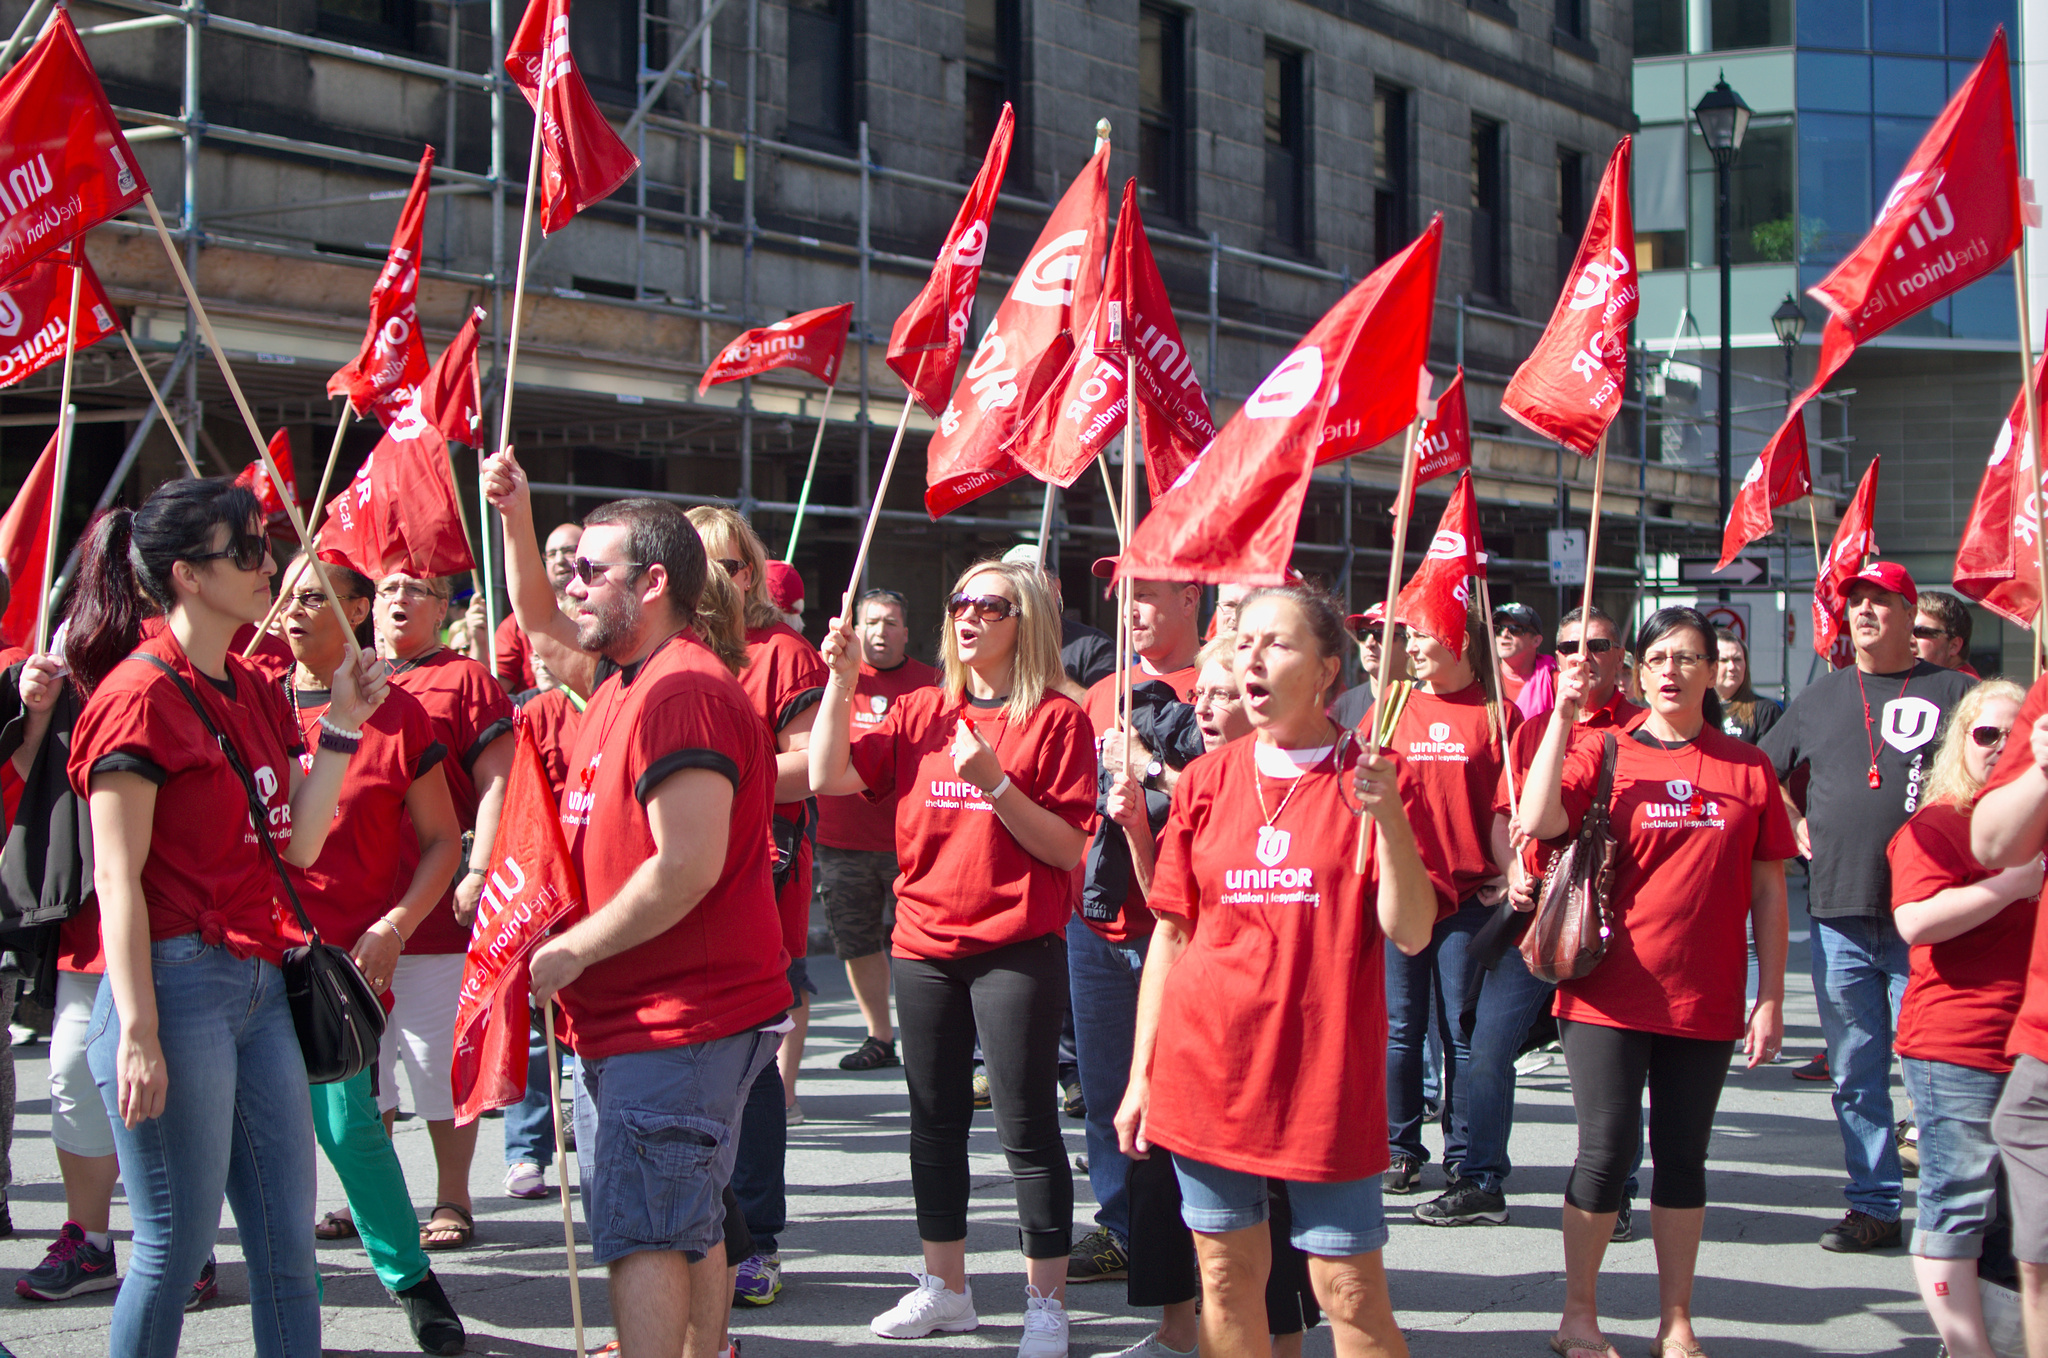 A group of Unifor members wearing, red and waving flags